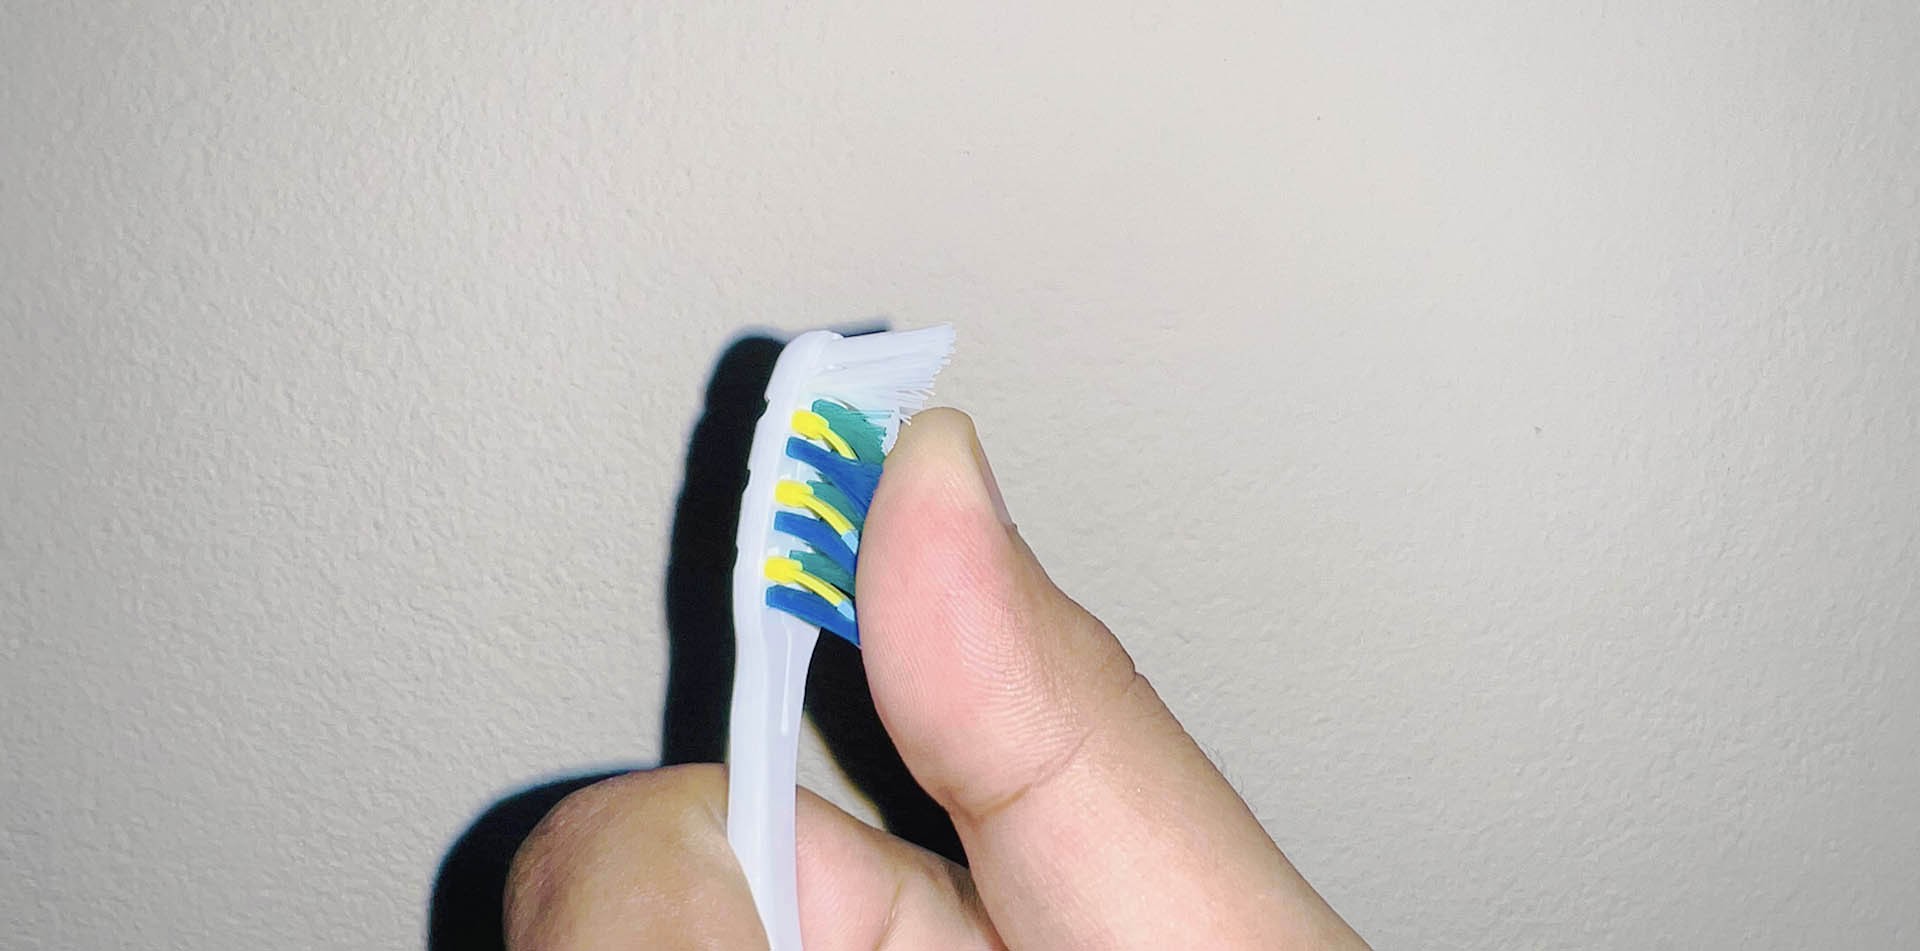 How To Clean A Toothbrush After Dropping It?